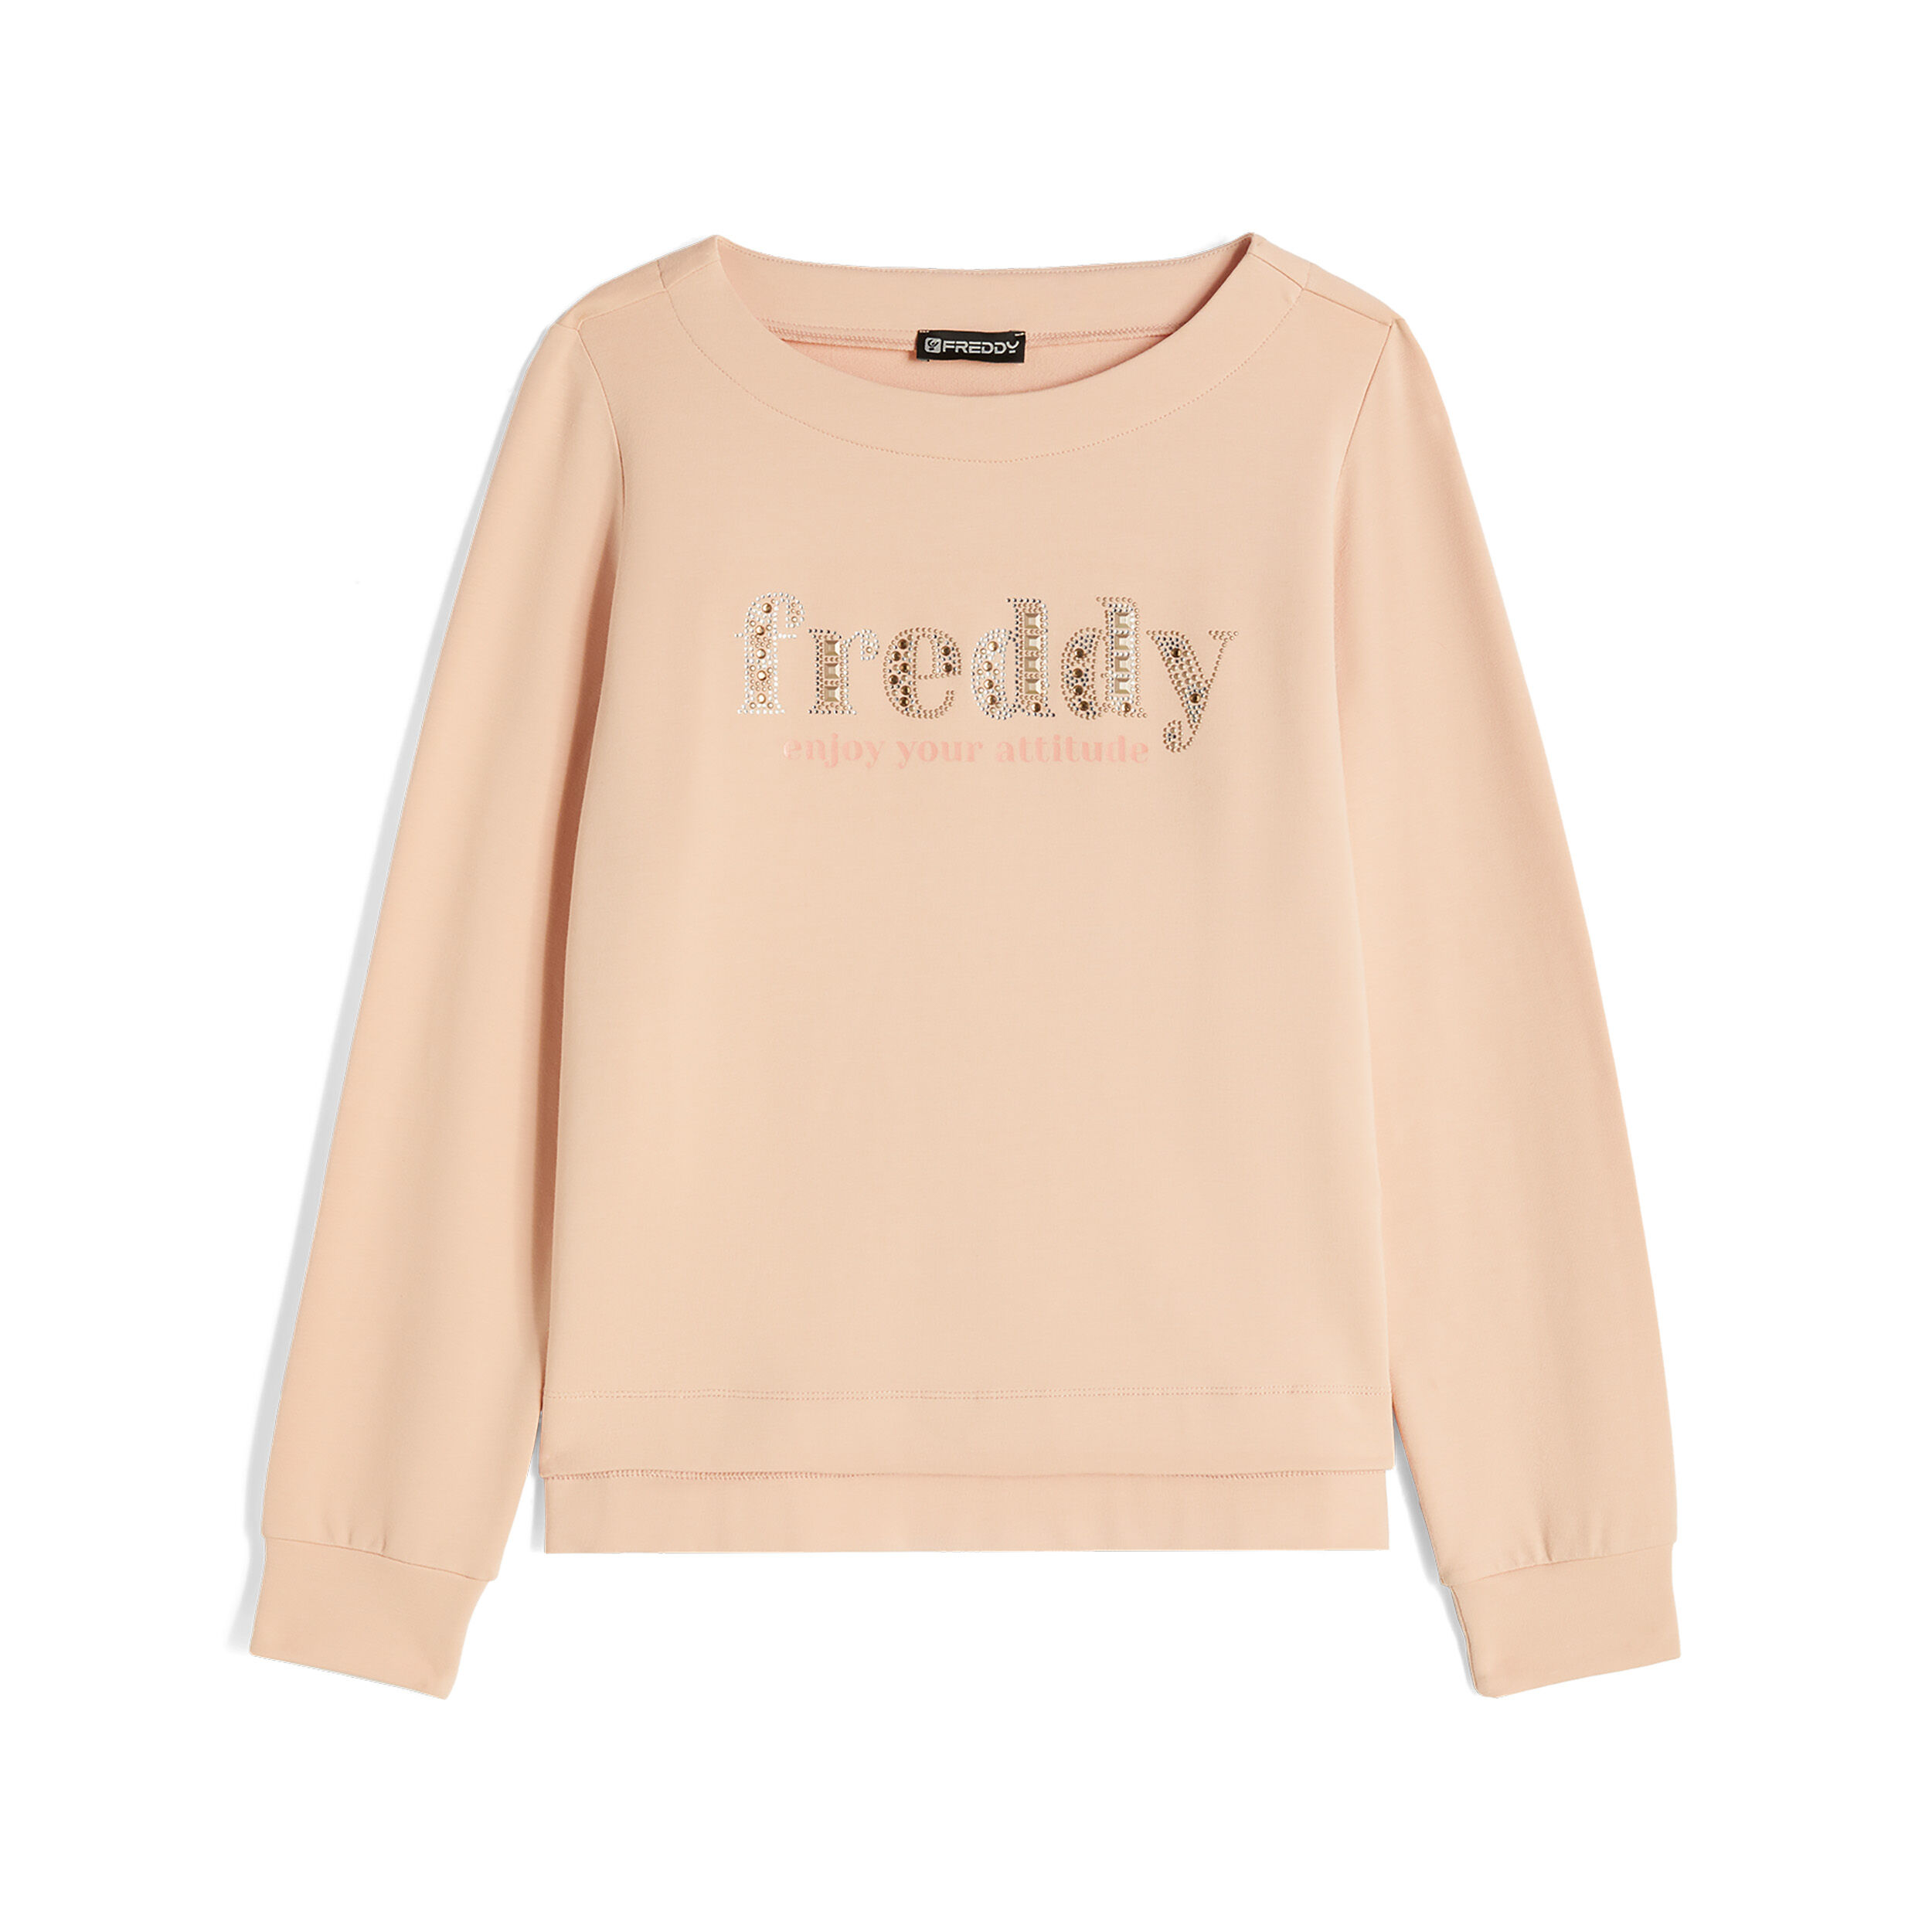 Freddy Felpa girocollo in french terry modal con logo in strass Pink Sand Donna Extra Large